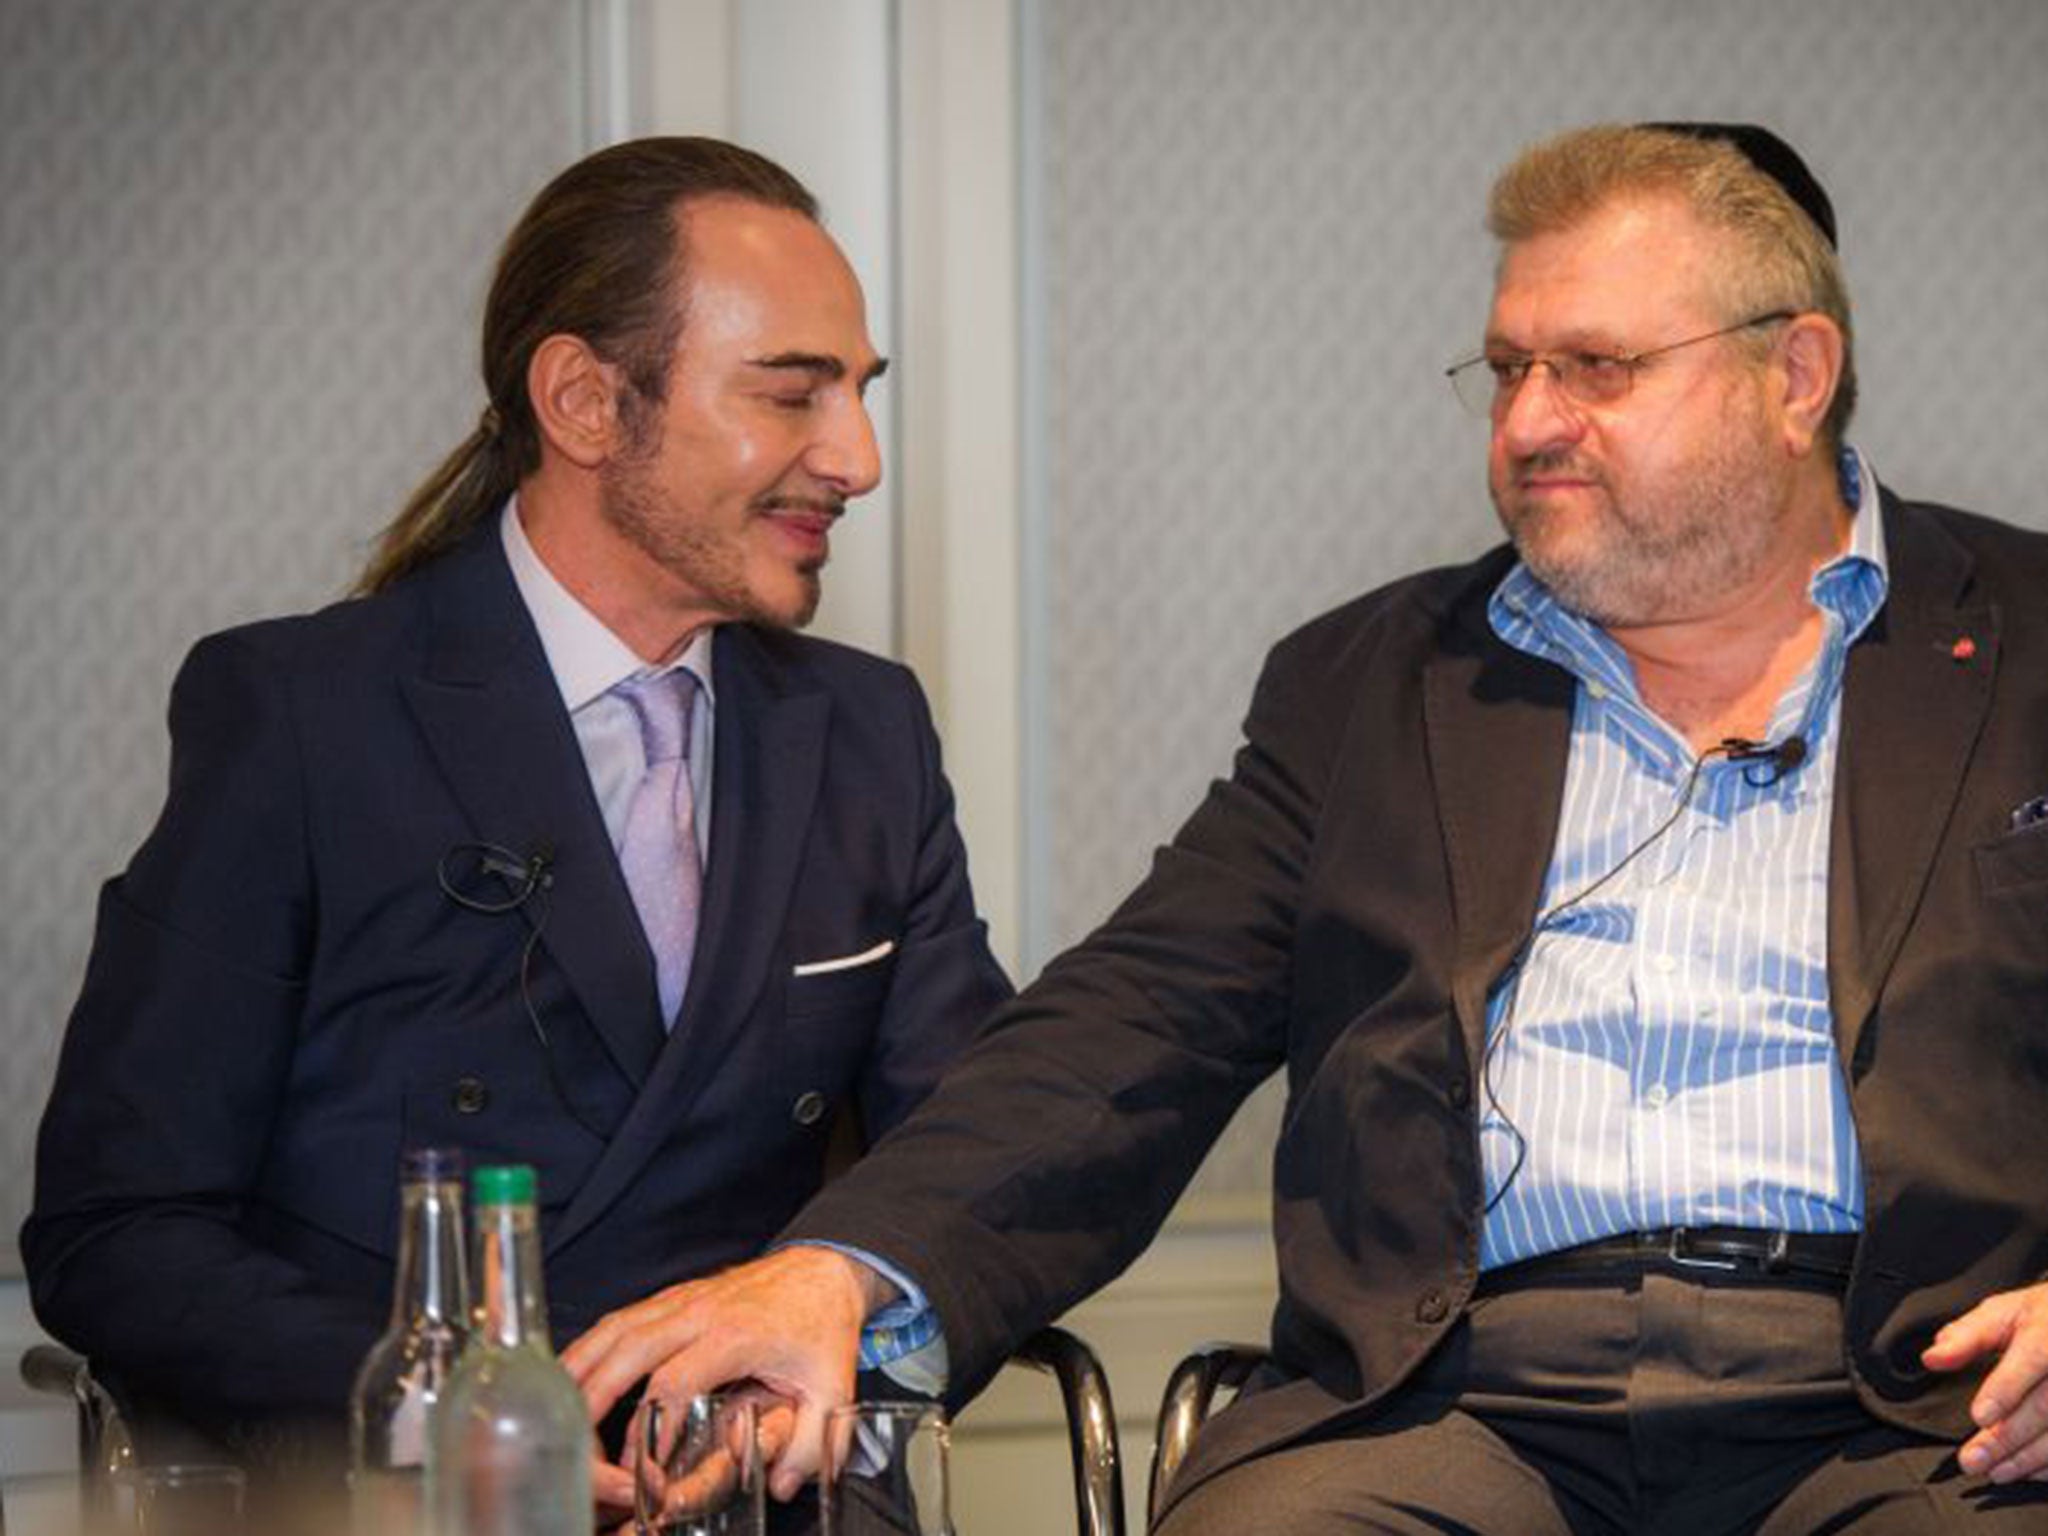 John Galliano travelled regularly from Paris to meet Rabbi Barry Marcus in London